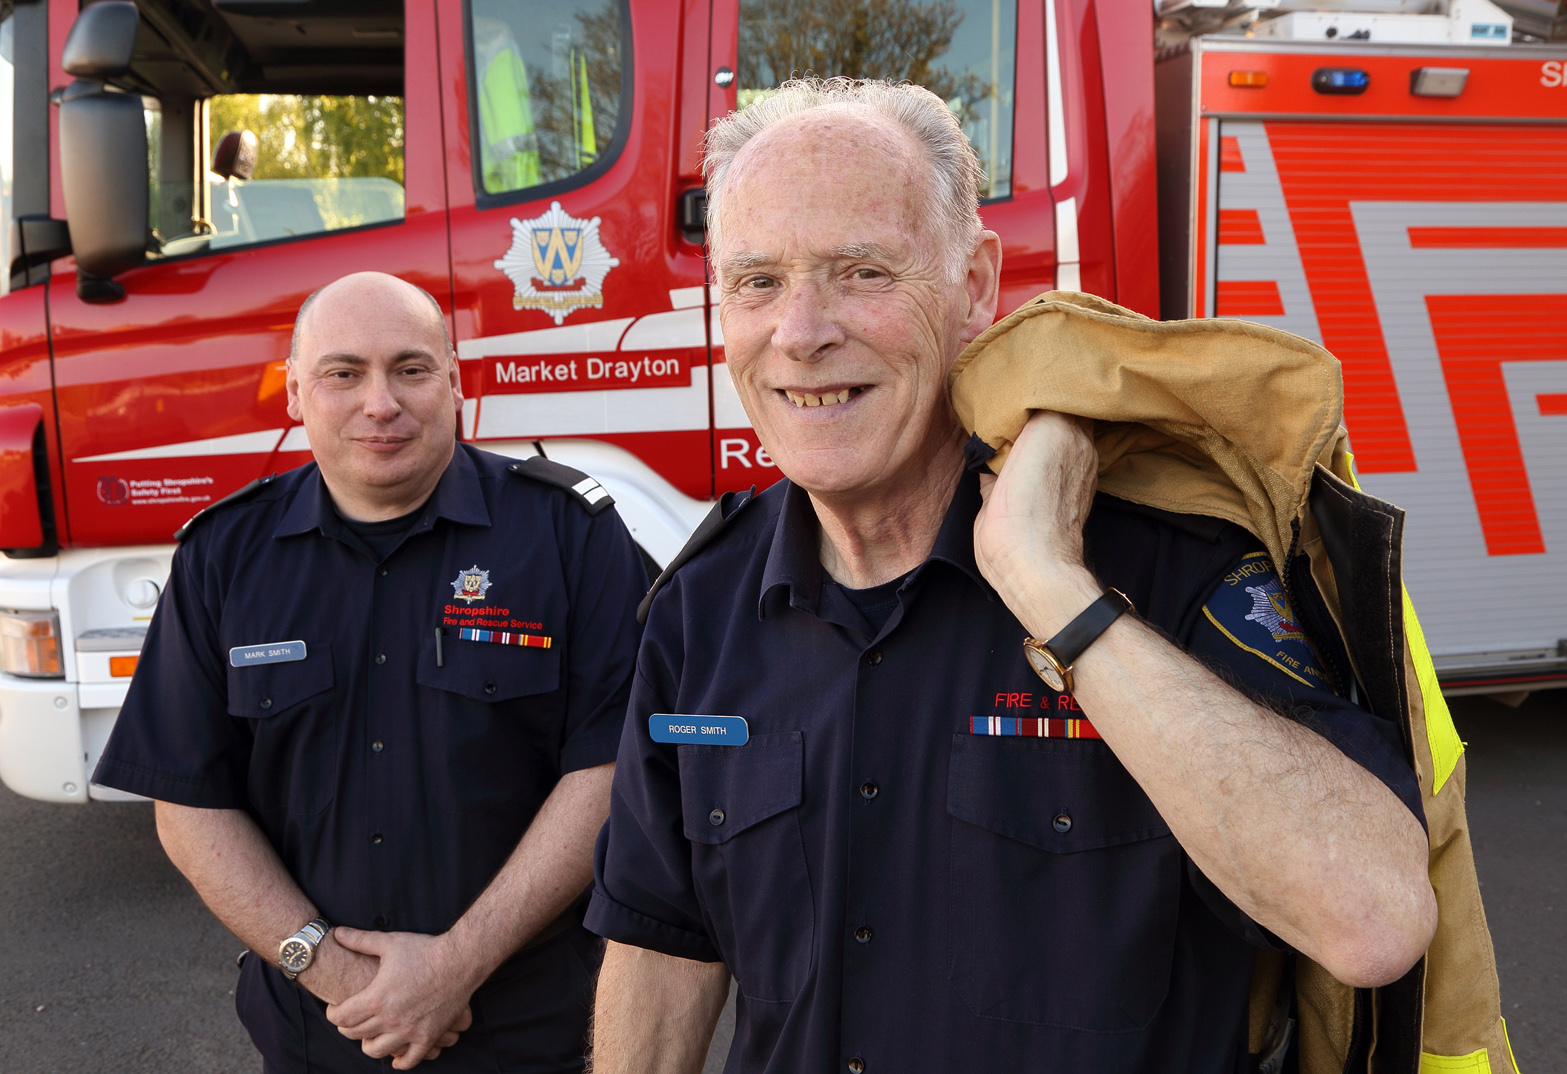 Roger Smith with son Mark, also a Shropshire firefighter